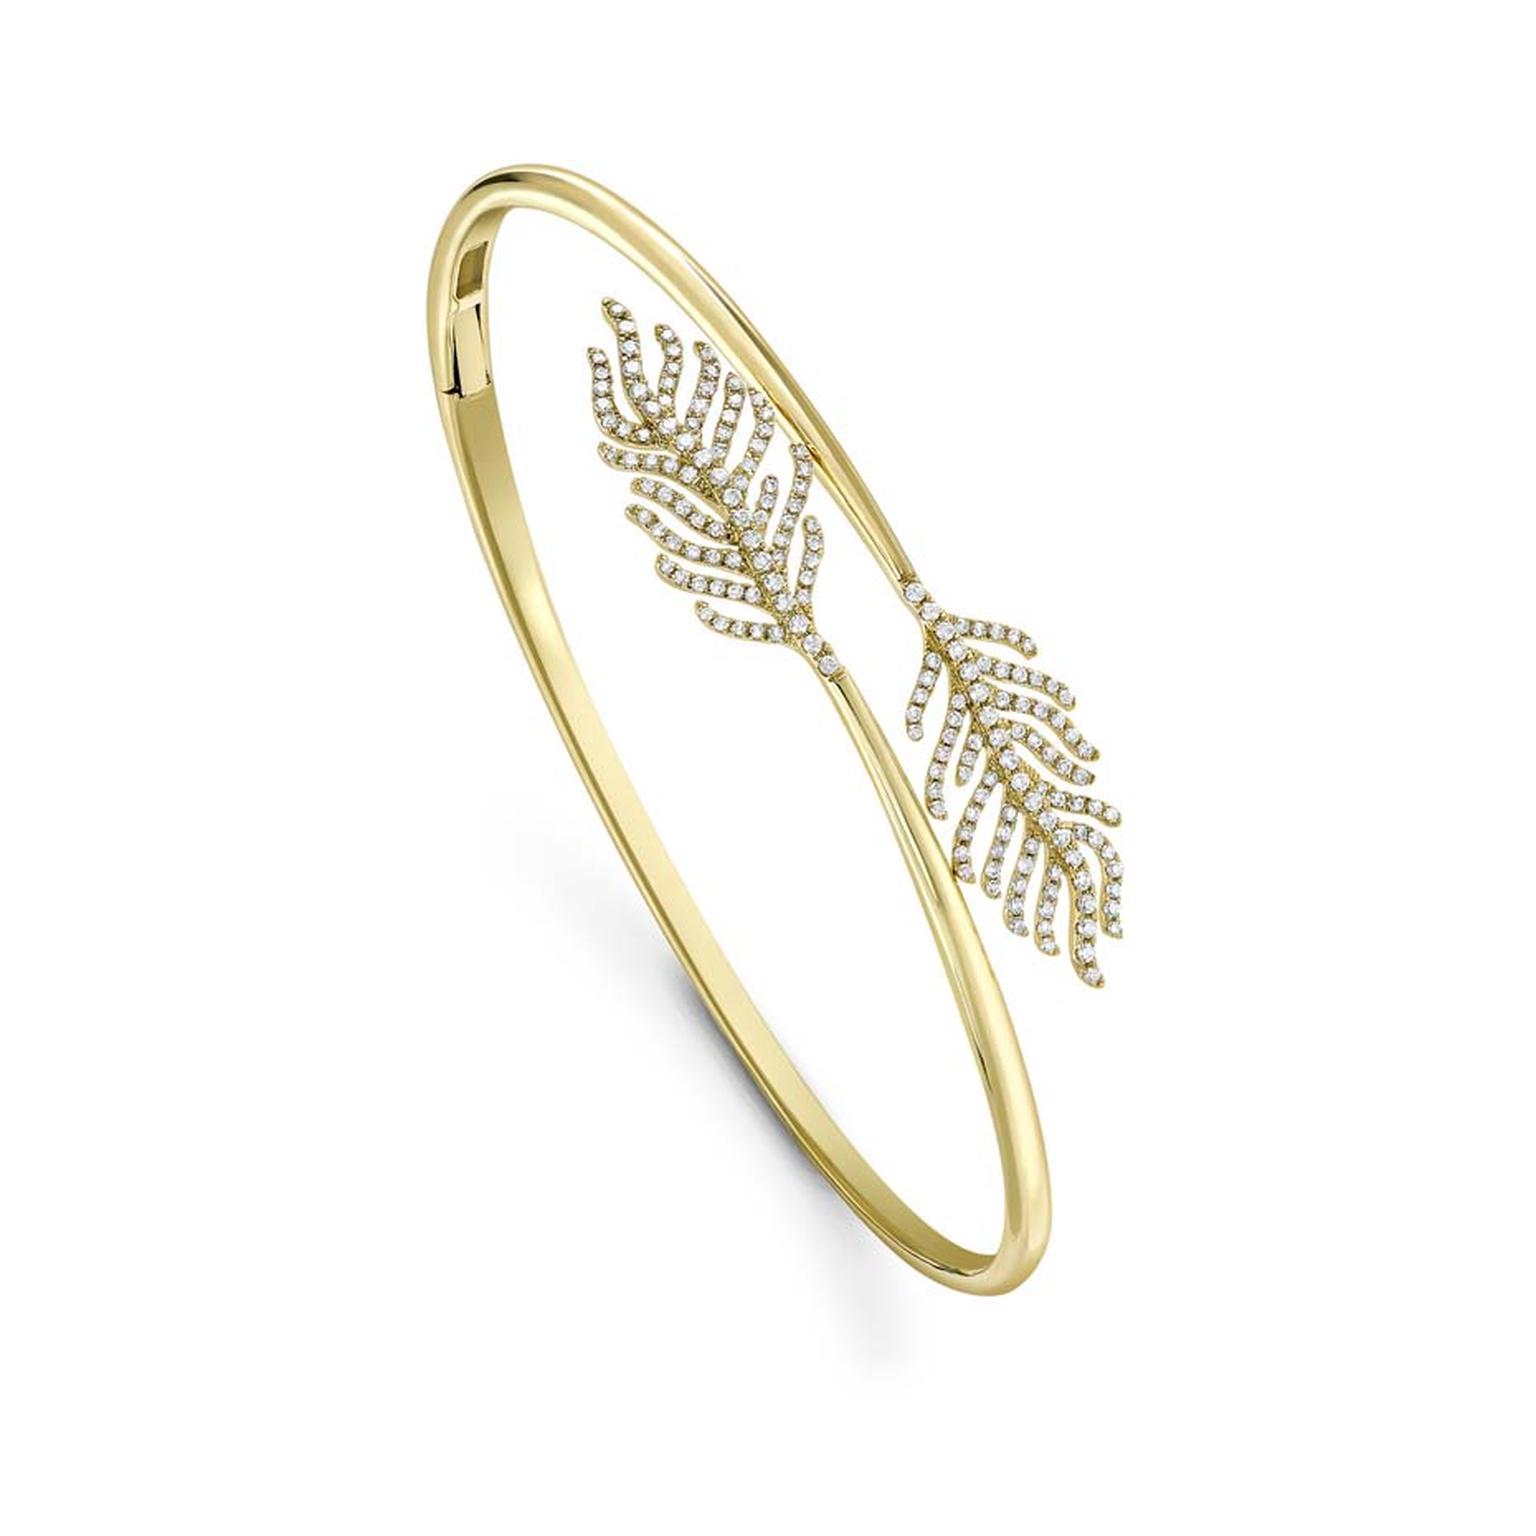 This elegant and timeless high jewellery Feather bangle by Kiki McDonough, can be worn on its own or layered with other pieces. A perfect choice to take a busy mother from day to evening with ease.